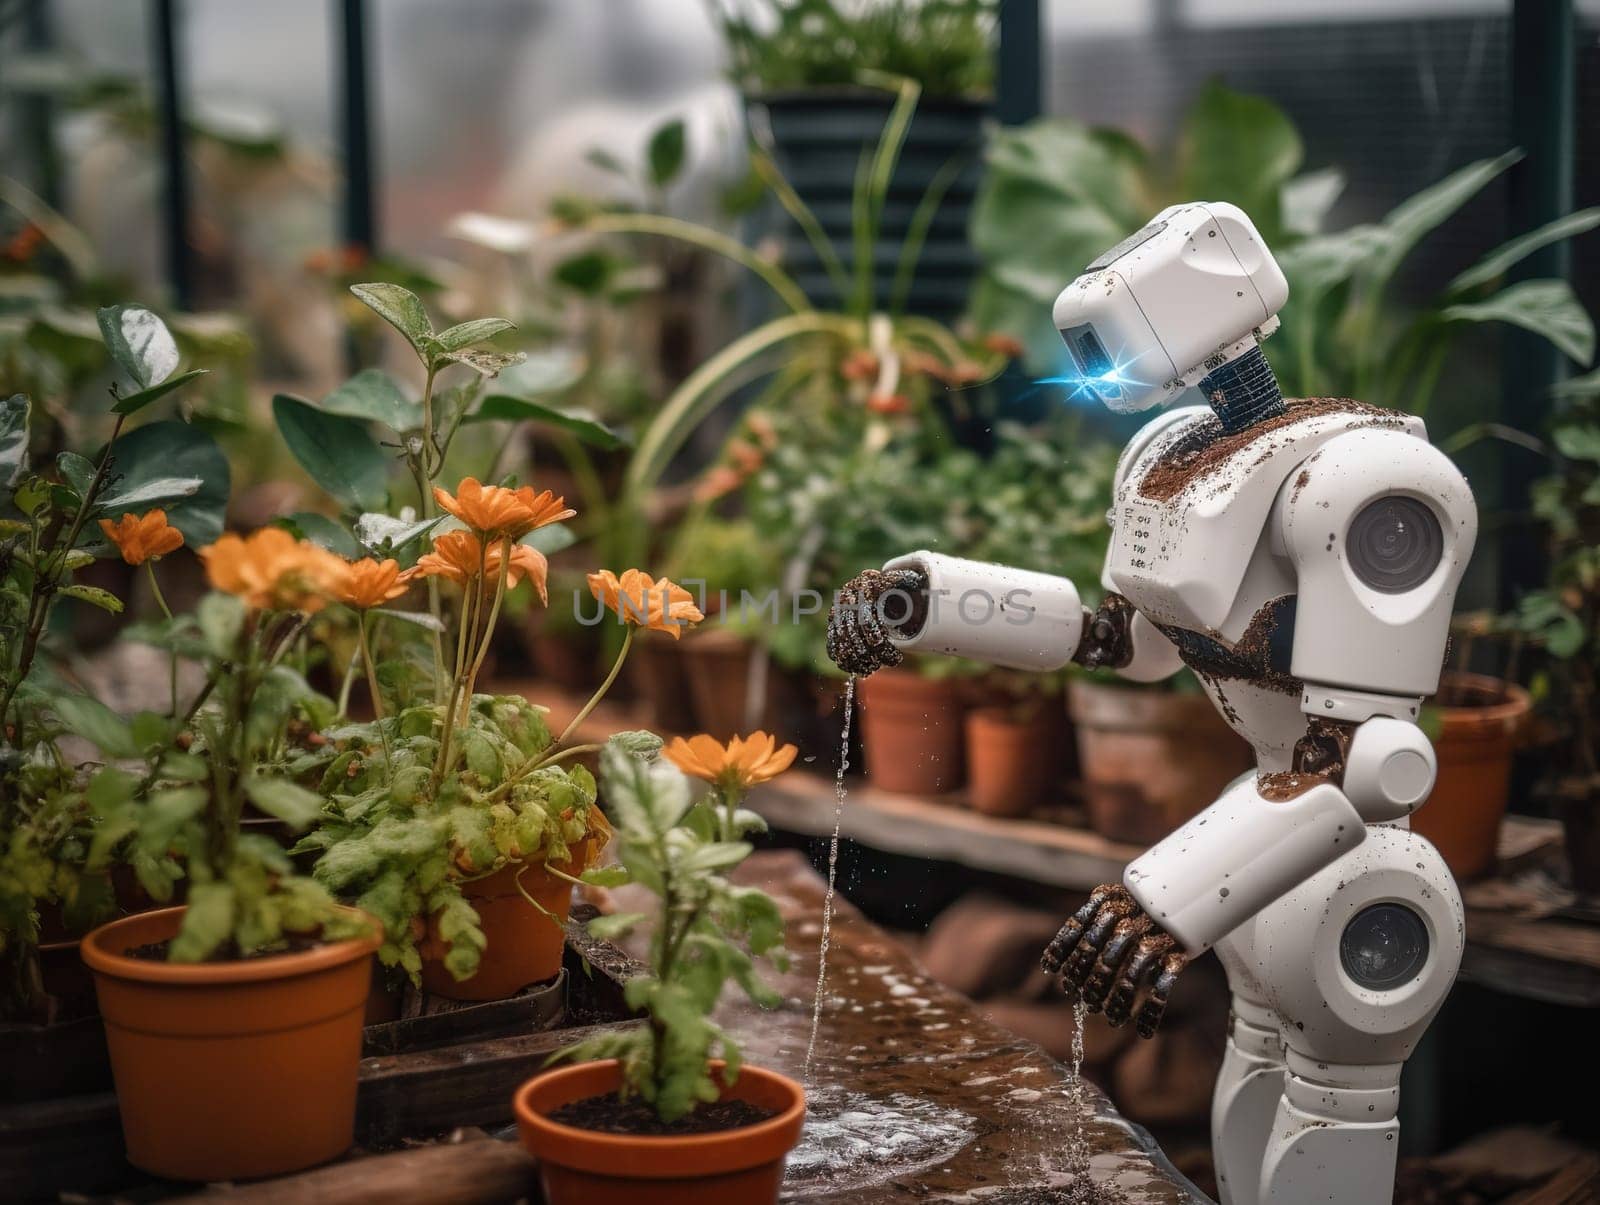 Old-Fashioned Android Robot Grows Flowers And Plants In A Greenhouse by tan4ikk1